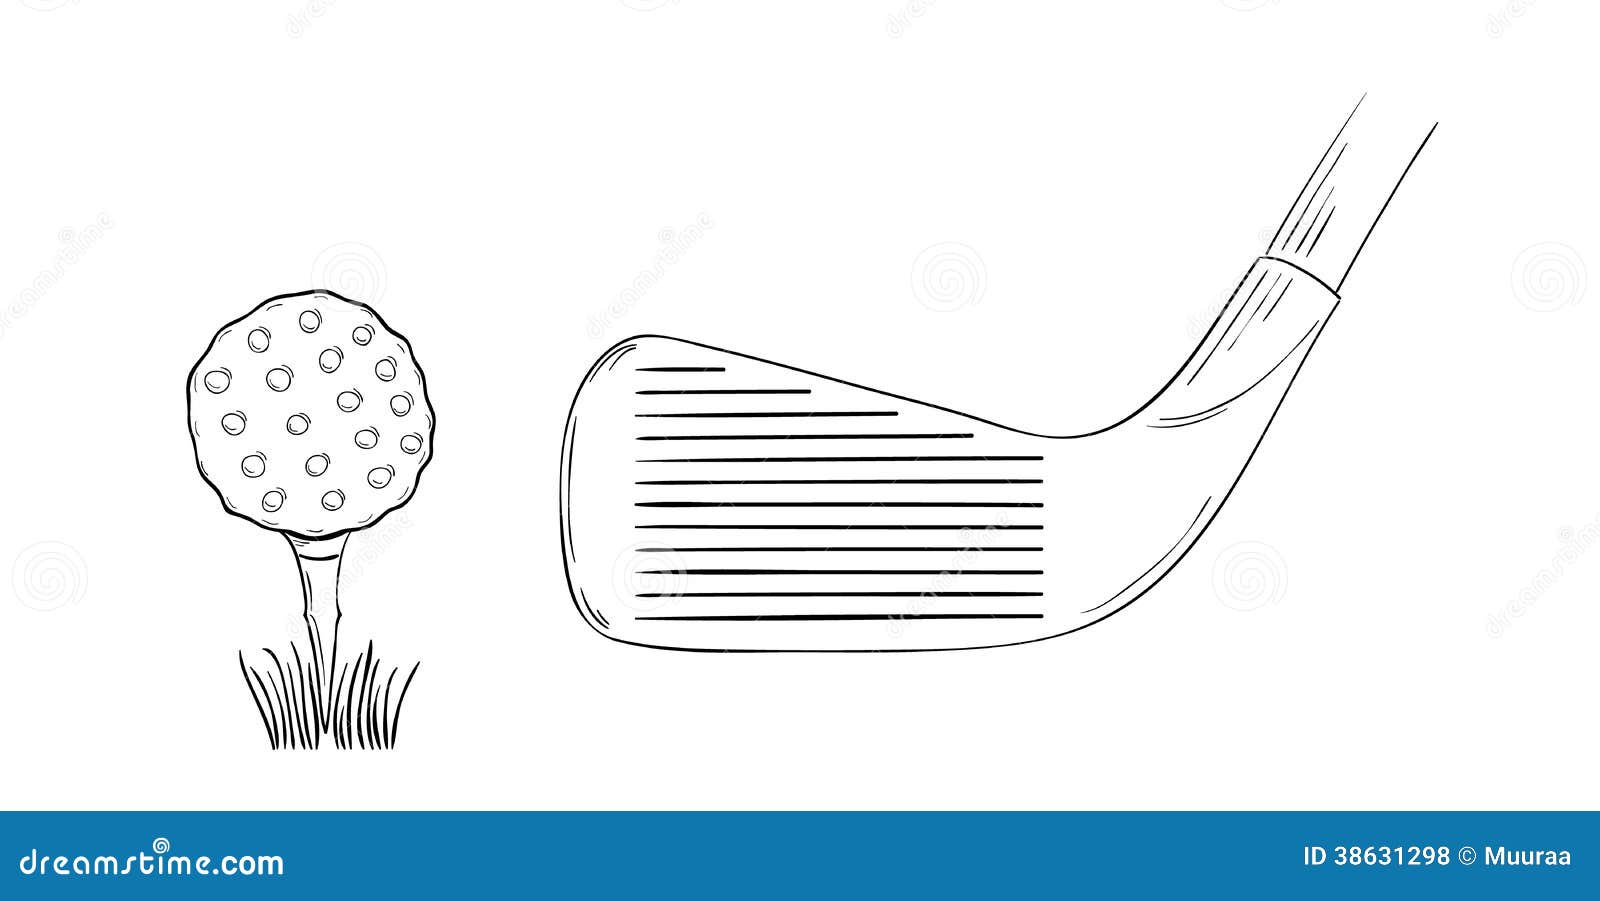 Sketch of the Golf Ball and Golf Club Stock Vector - Illustration of